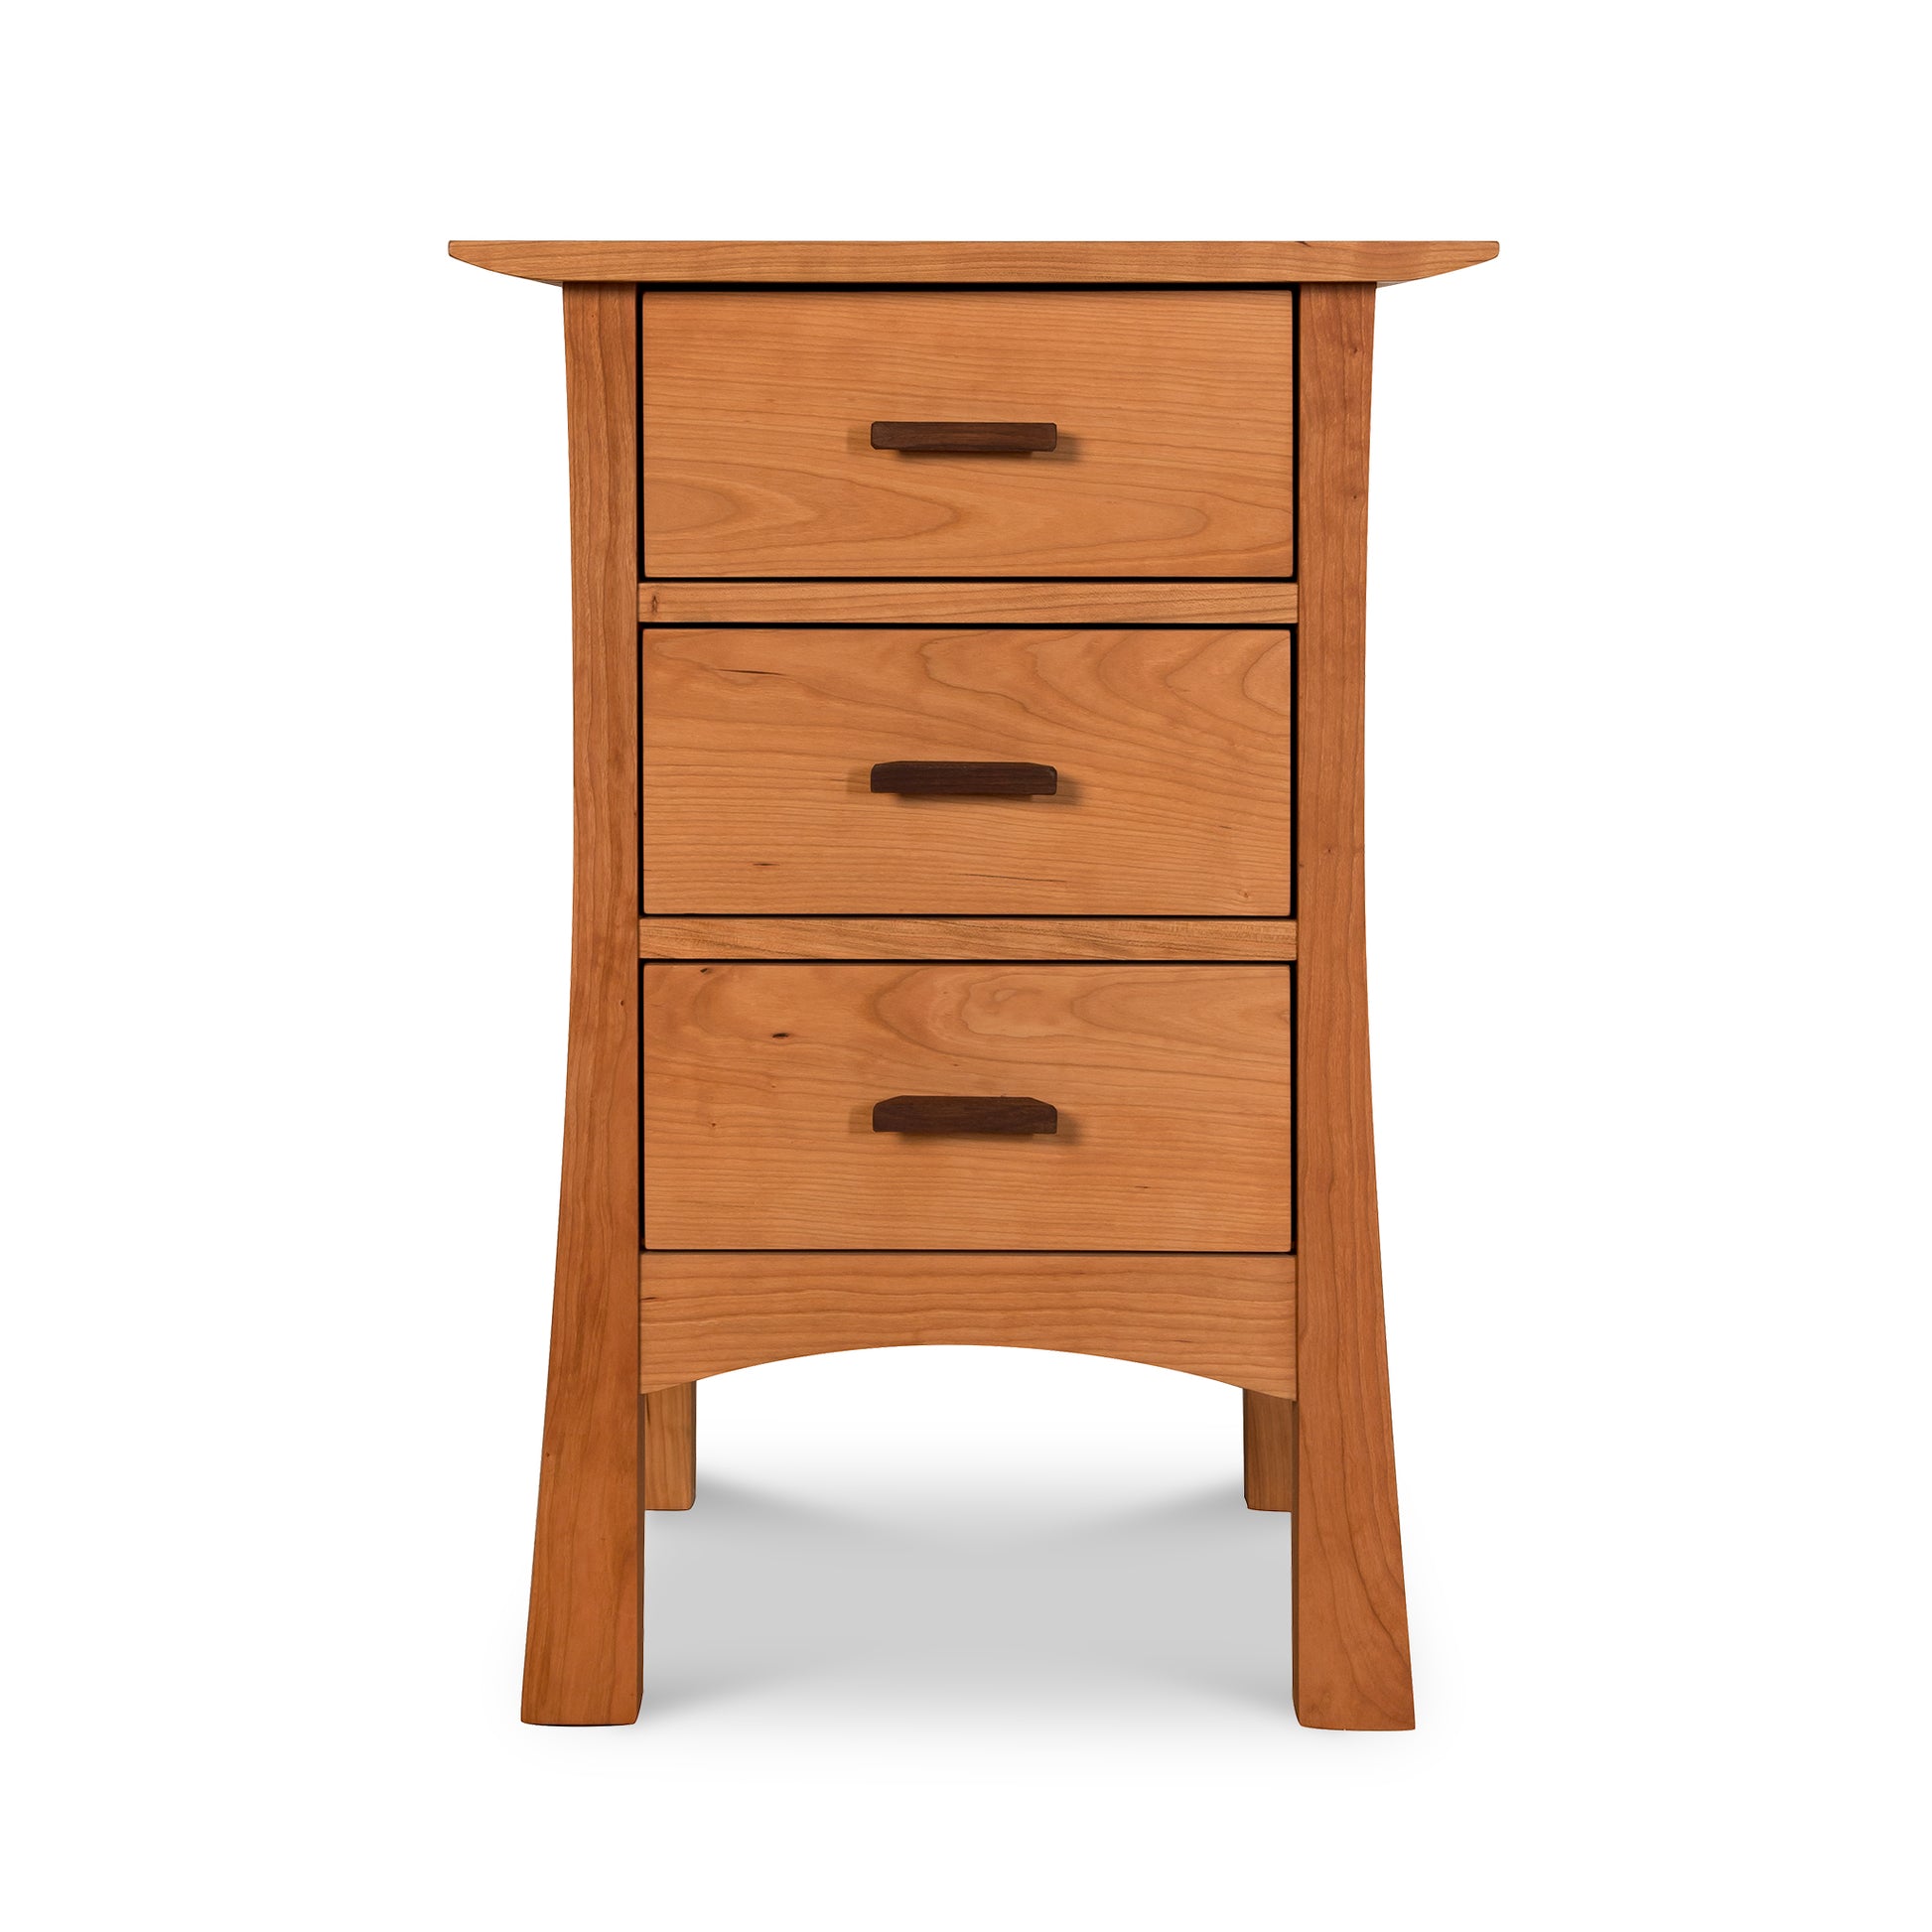 Vermont Furniture Designs Contemporary Craftsman 3-Drawer Nightstand with three drawers for storage.